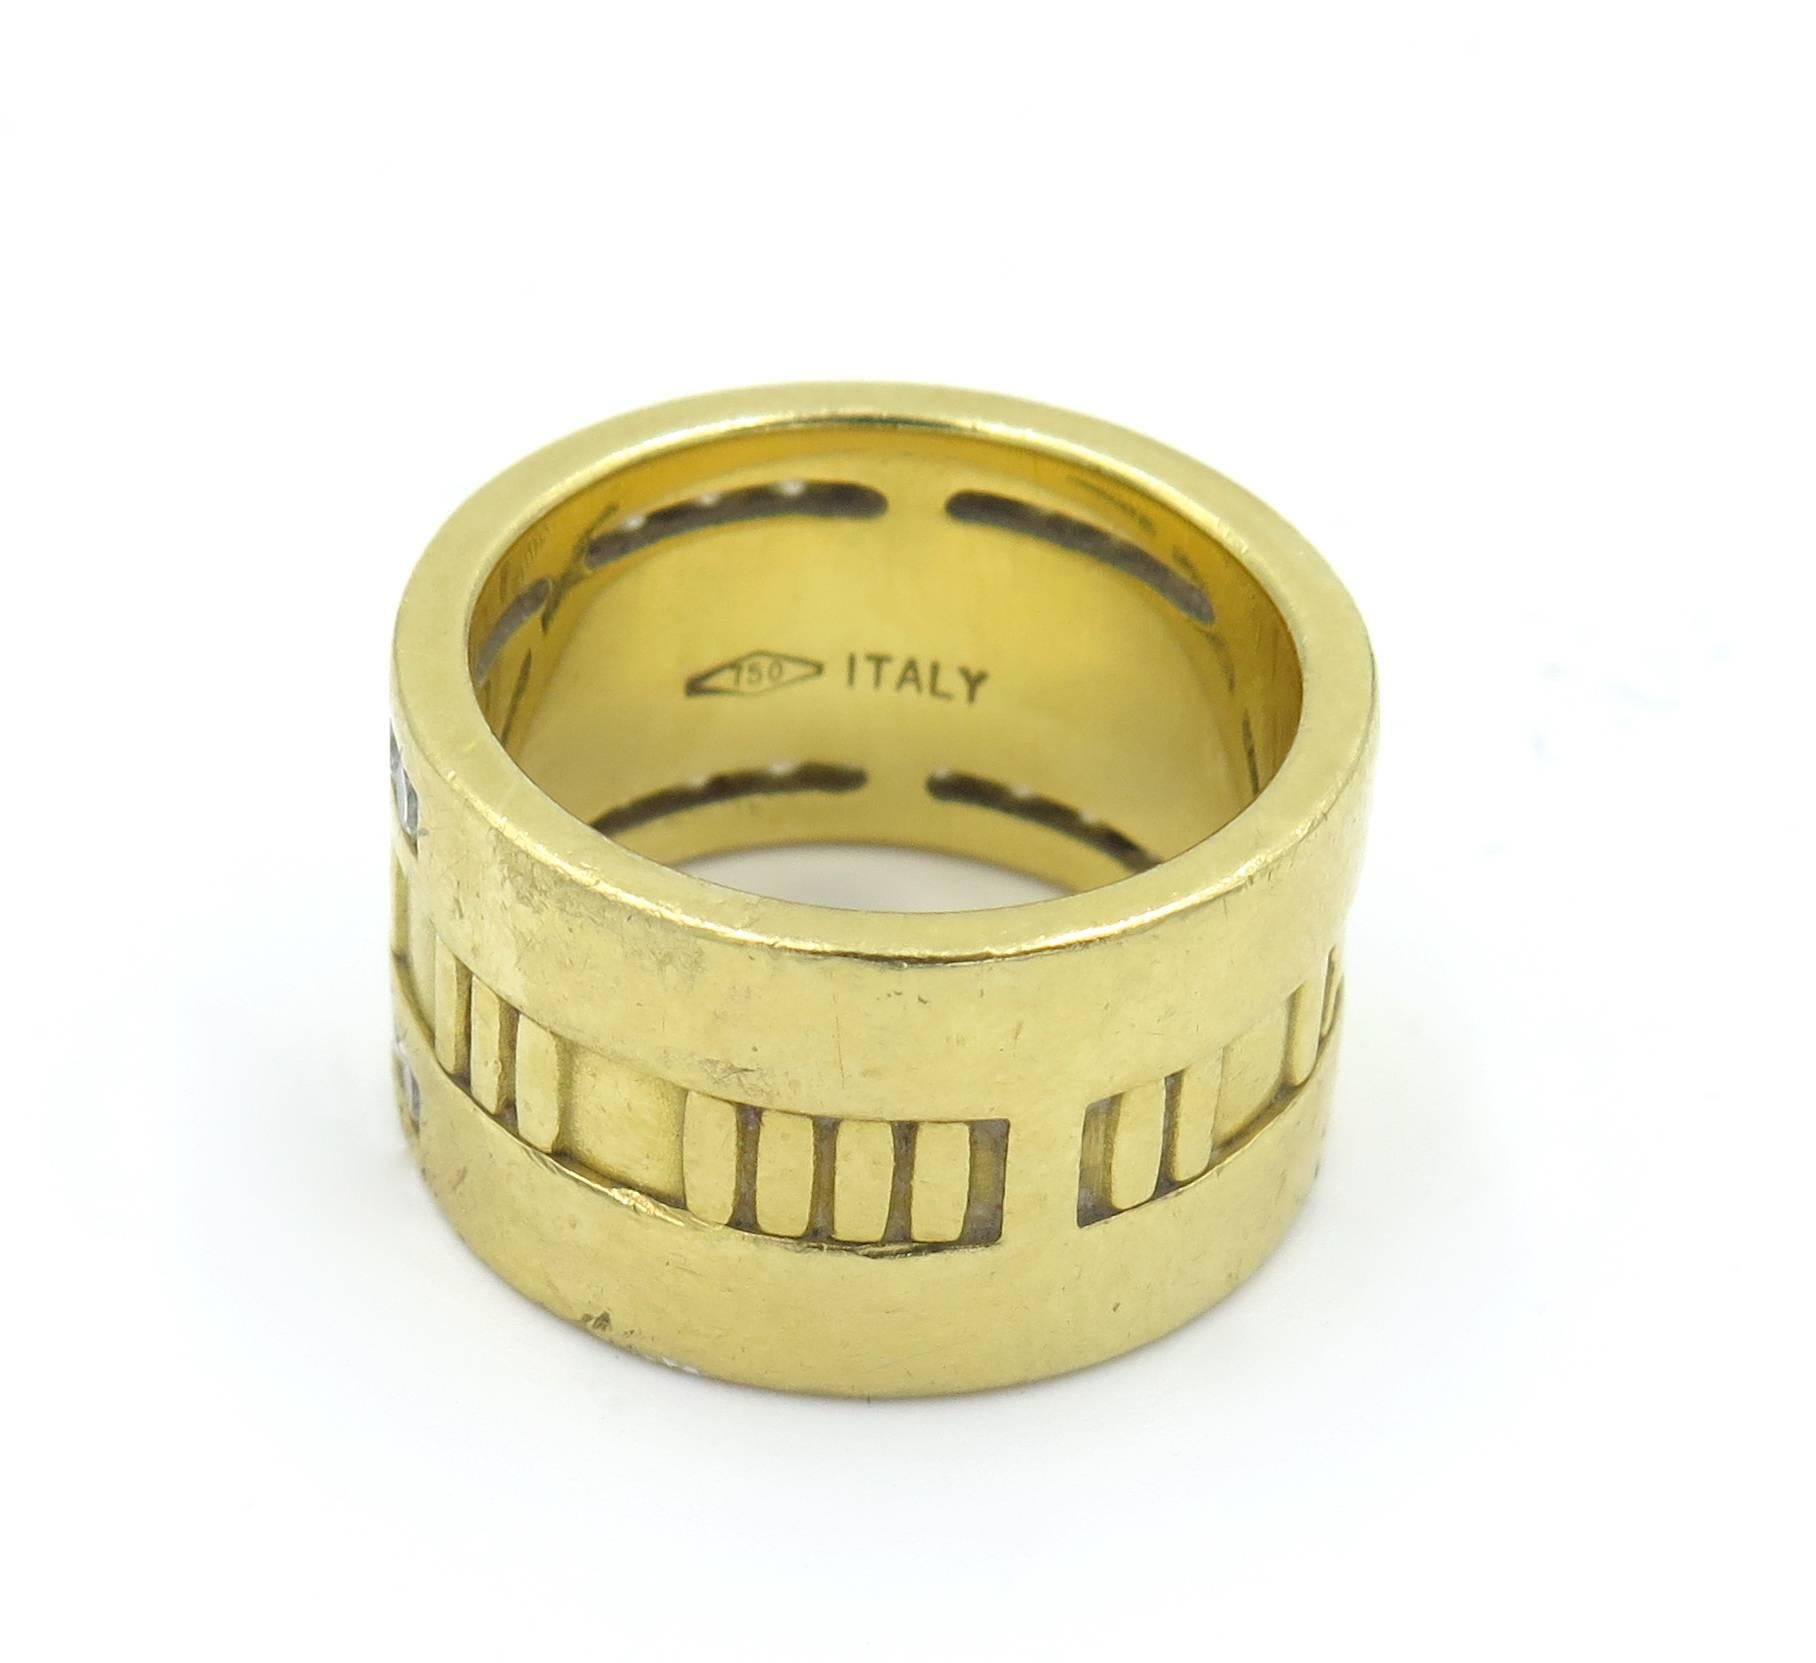 An 18 karat yellow gold and diamond “Atlas” band ring, signed Tiffany & Co., 1995. Designed as a wide gold band, decorated with Roman numerals, the top enhanced by channel-set circular-cut diamonds. (30) circular-cut diamonds, weighing approximately